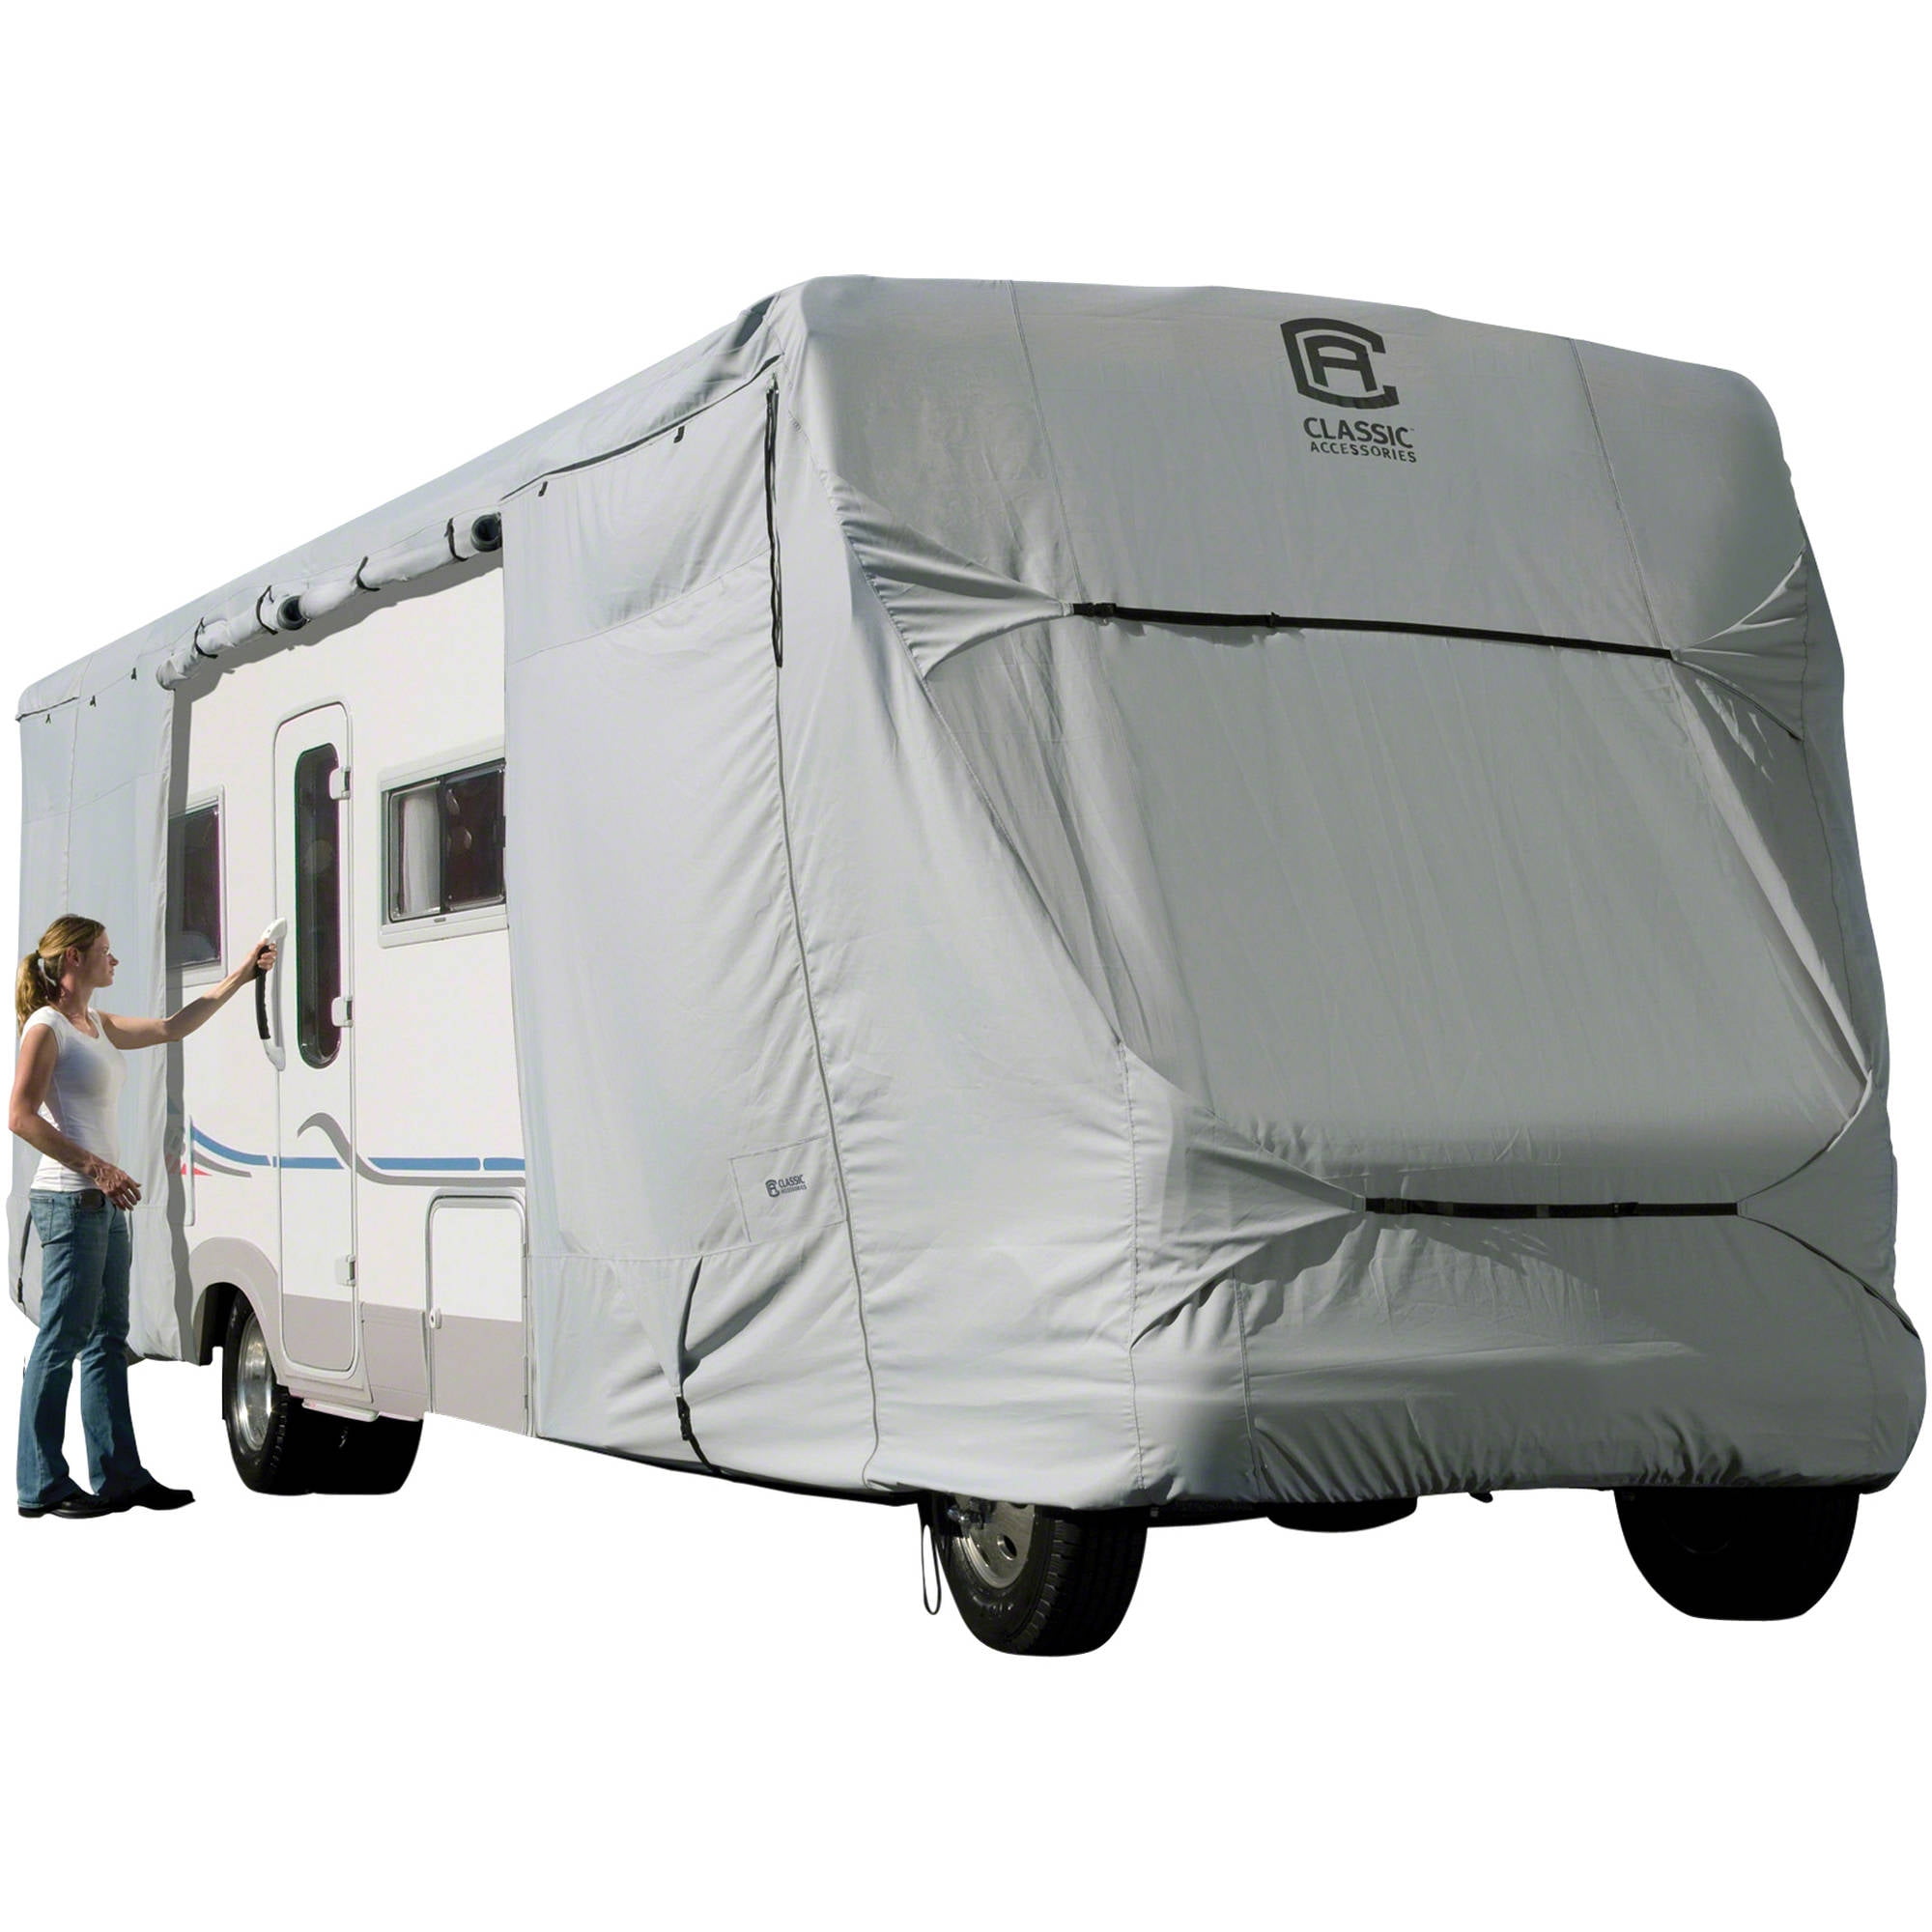 Gutter Cover 29' RV Camper Motorhome with 4 Tire Covers RVMasking 500D Top Class C Cover RV Cover Upgraded Waterproof Camper Cover for 26' 